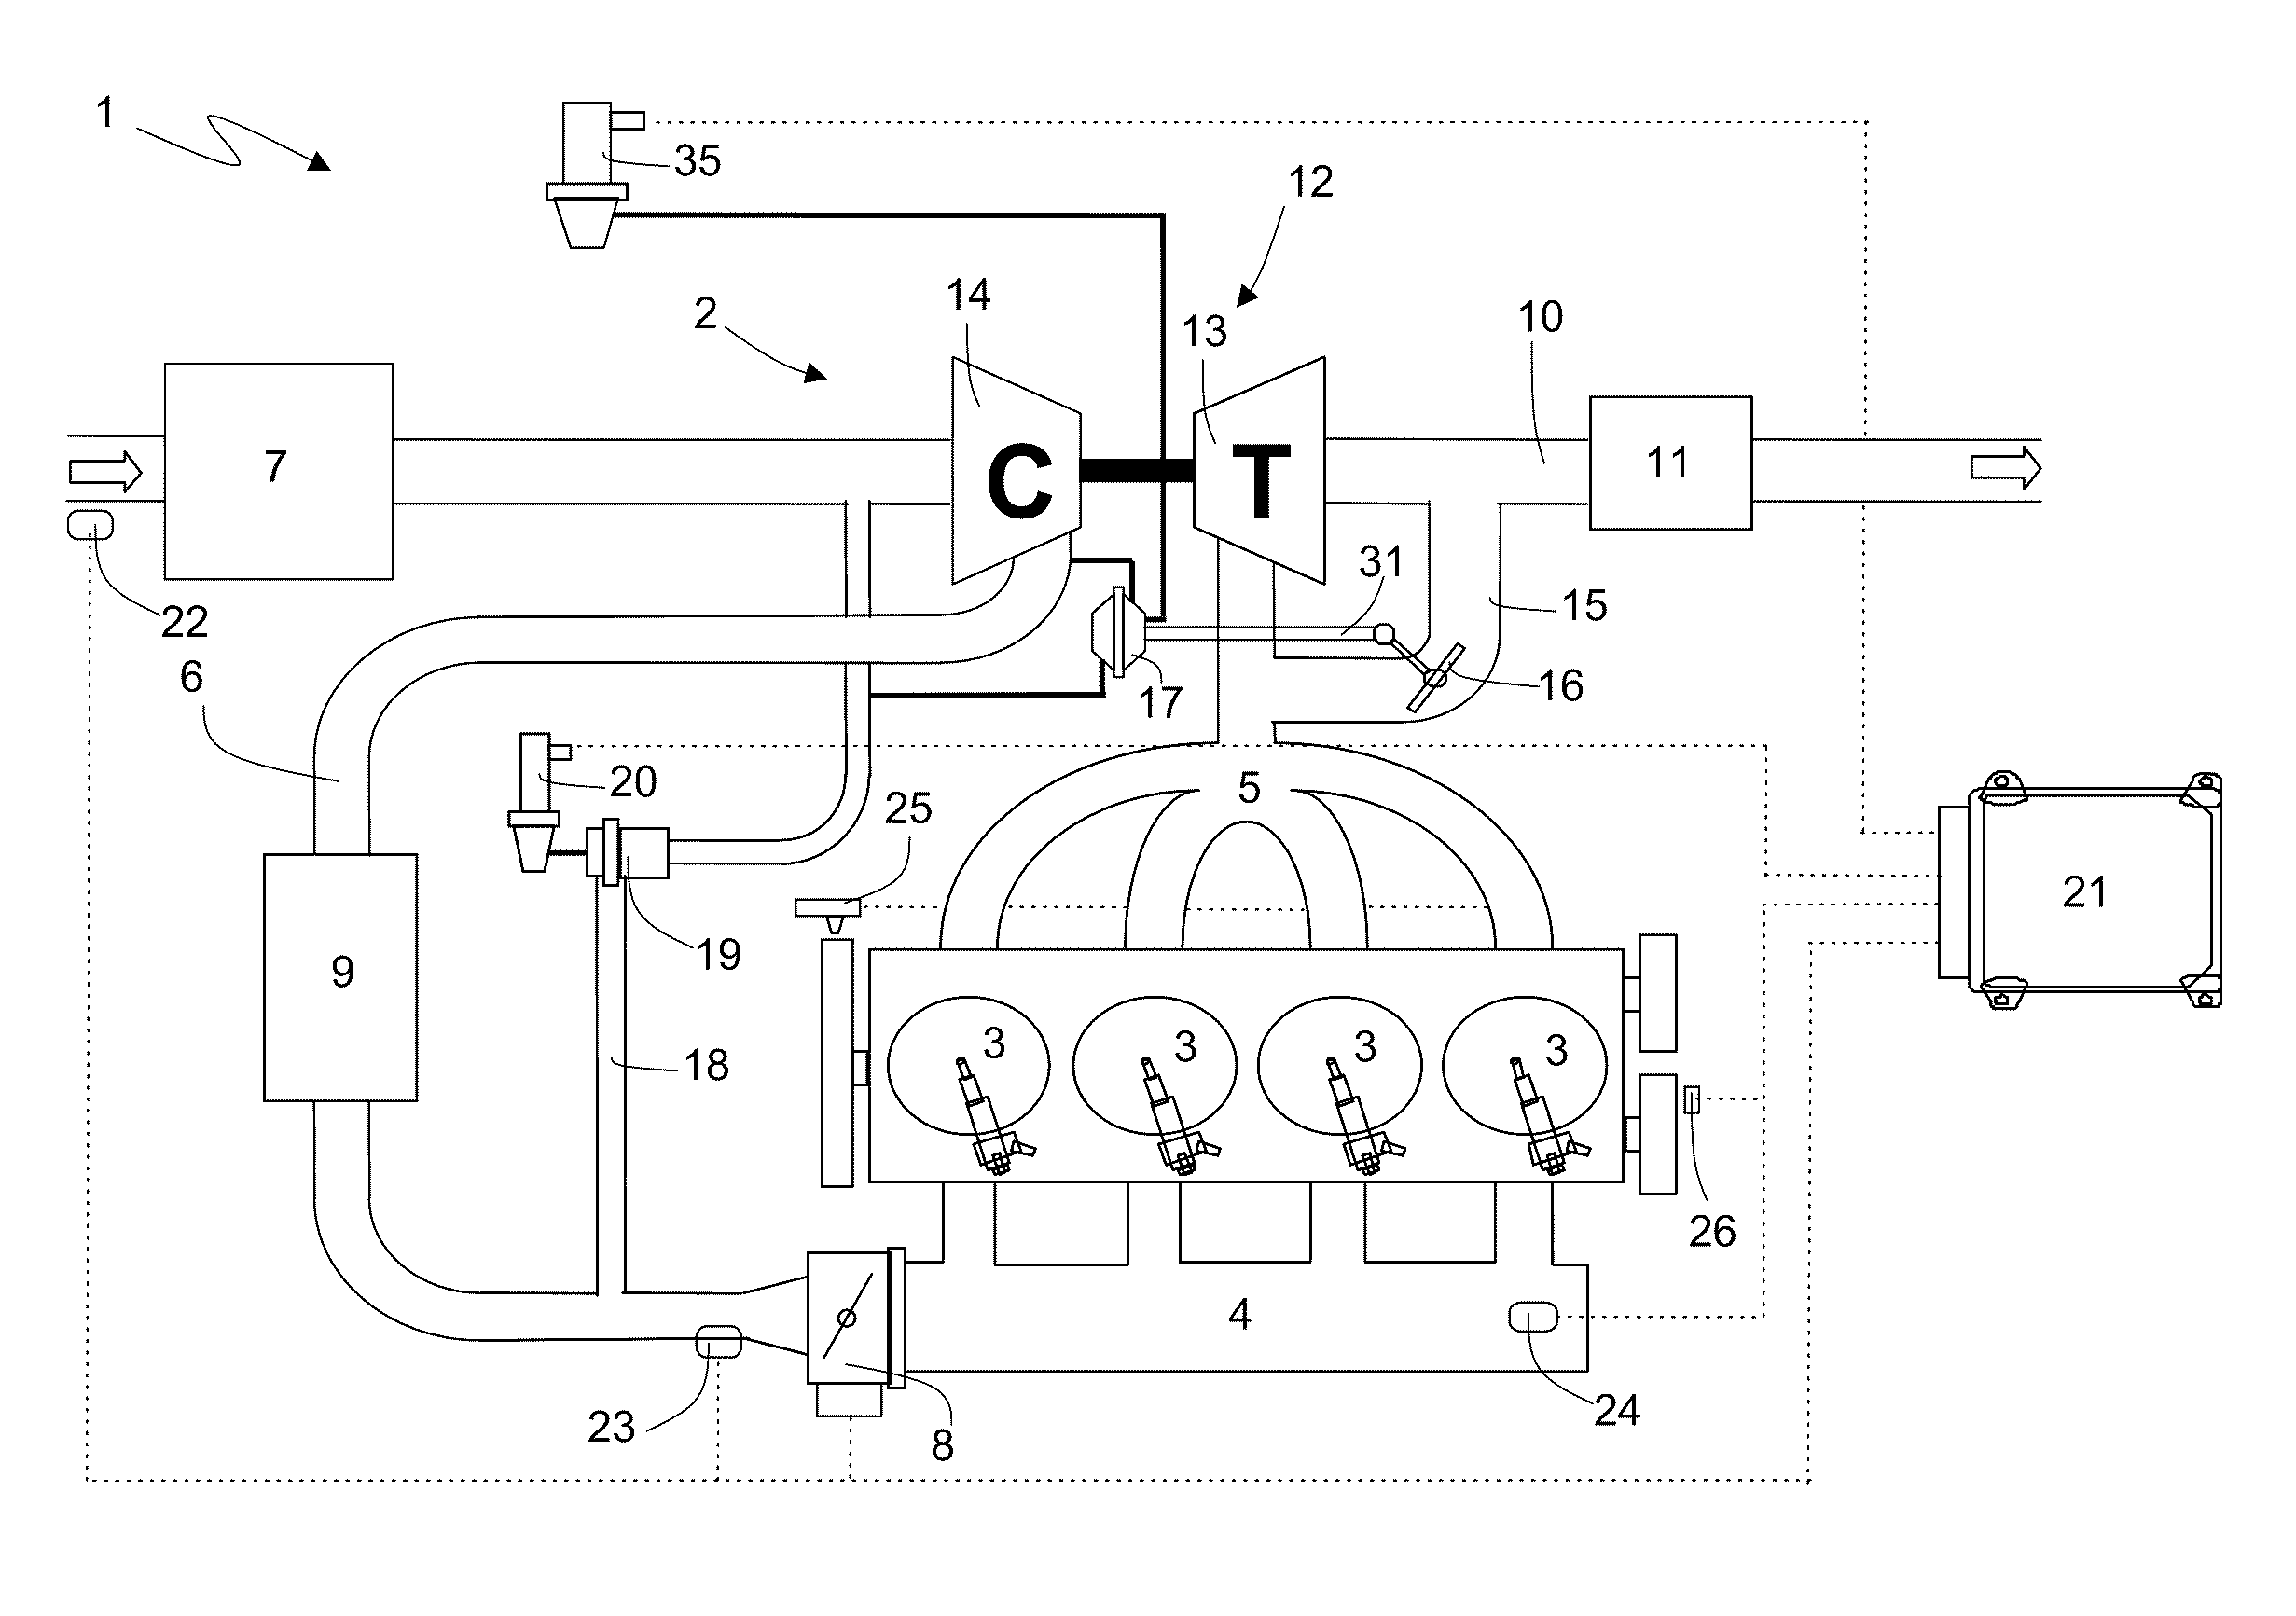 Method for zone controlling a wastegate in a turbocharged internal combustion engine